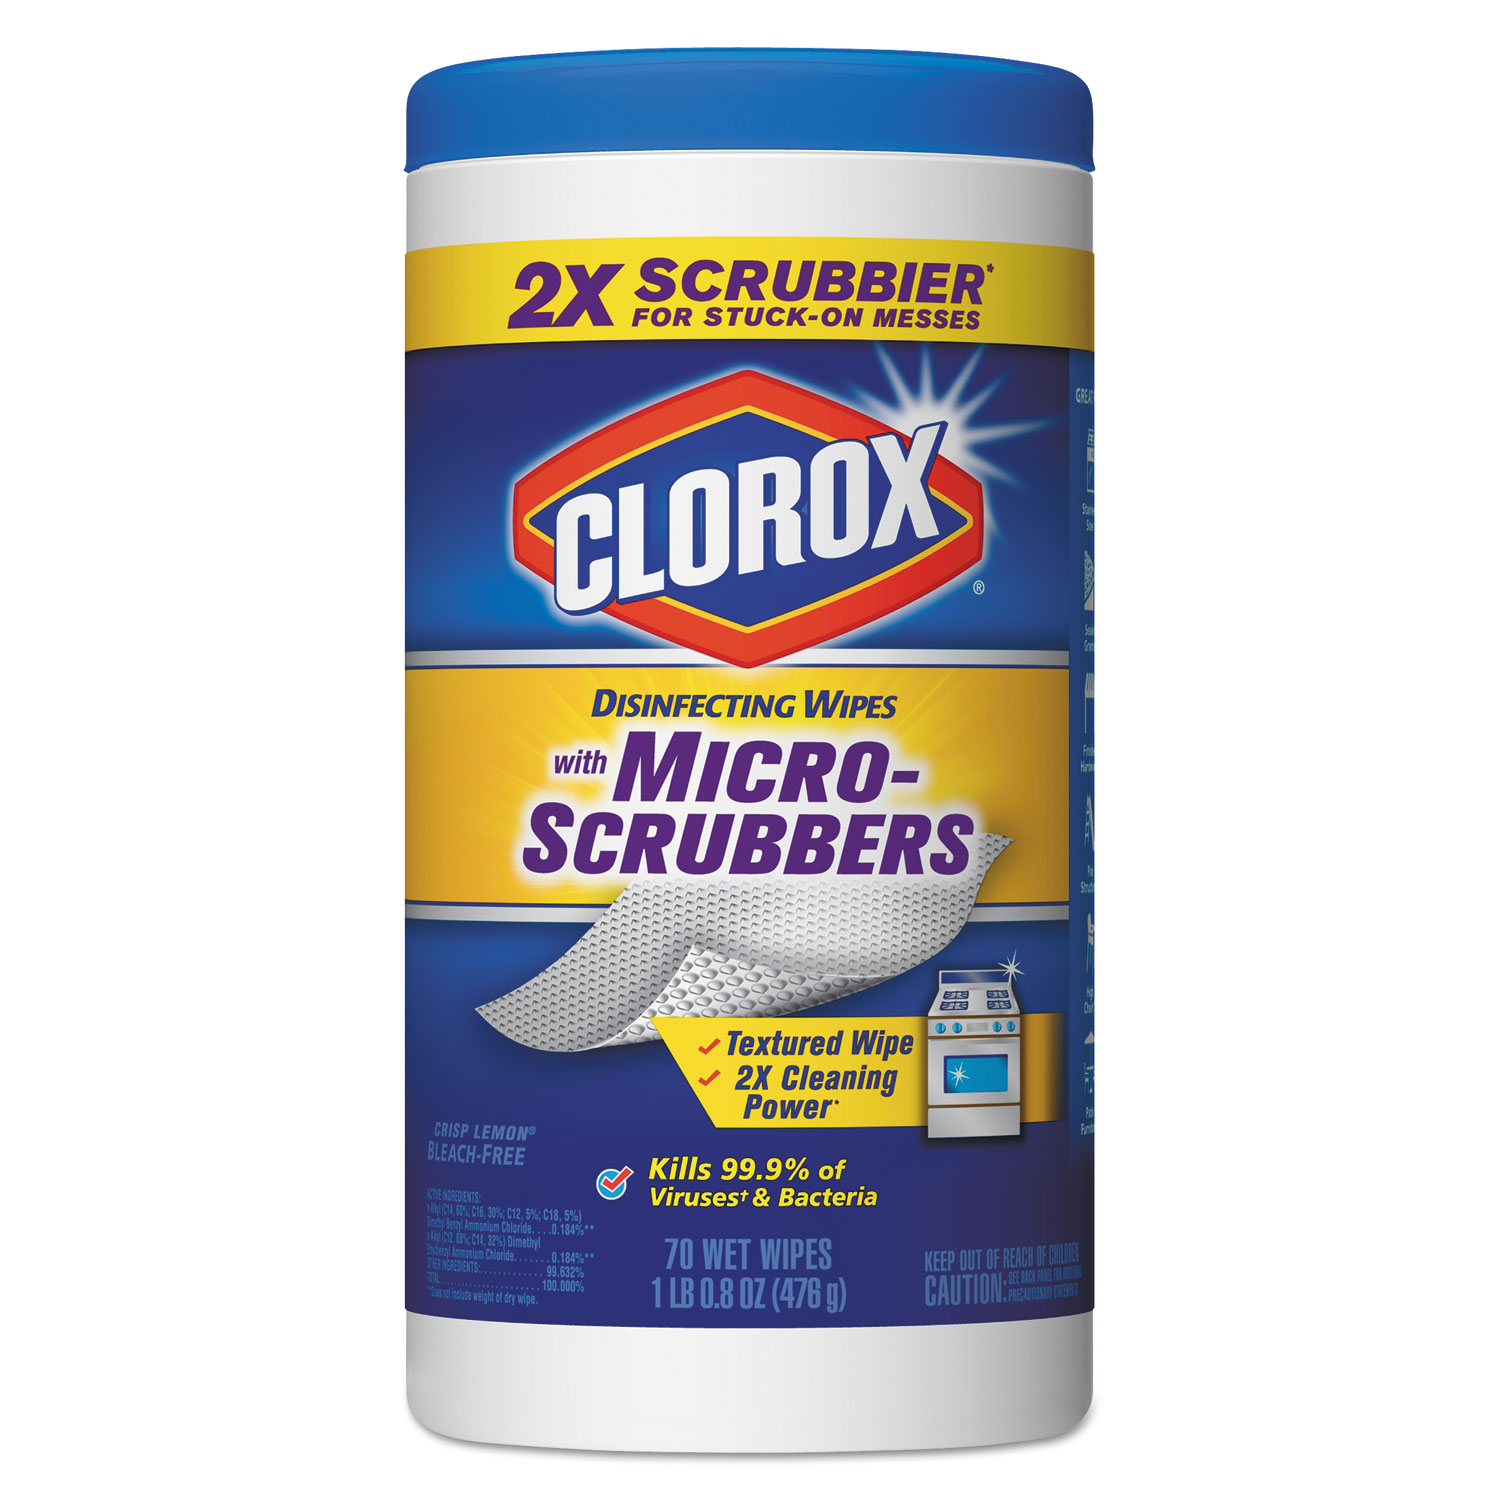  Clorox CLO 31270EA Disinfecting Wipes with Micro-Scrubbers, Crisp Lemon, 7 x 8, 70/Canister (CLO31270EA) 